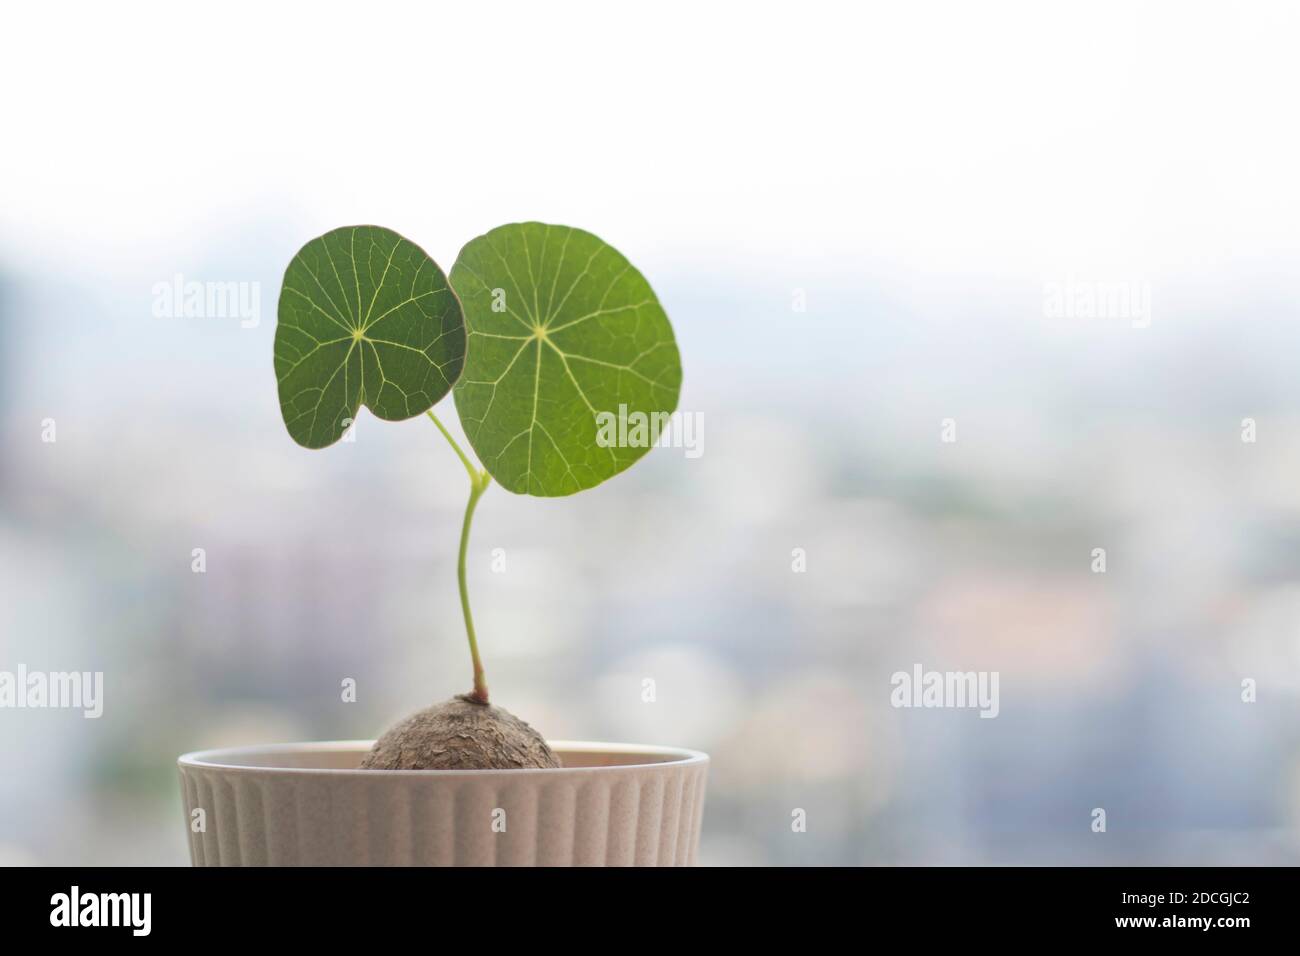 Stephania erecta with blurred background. Herbaceous plant with spherical leaves on blurred background. Stock Photo